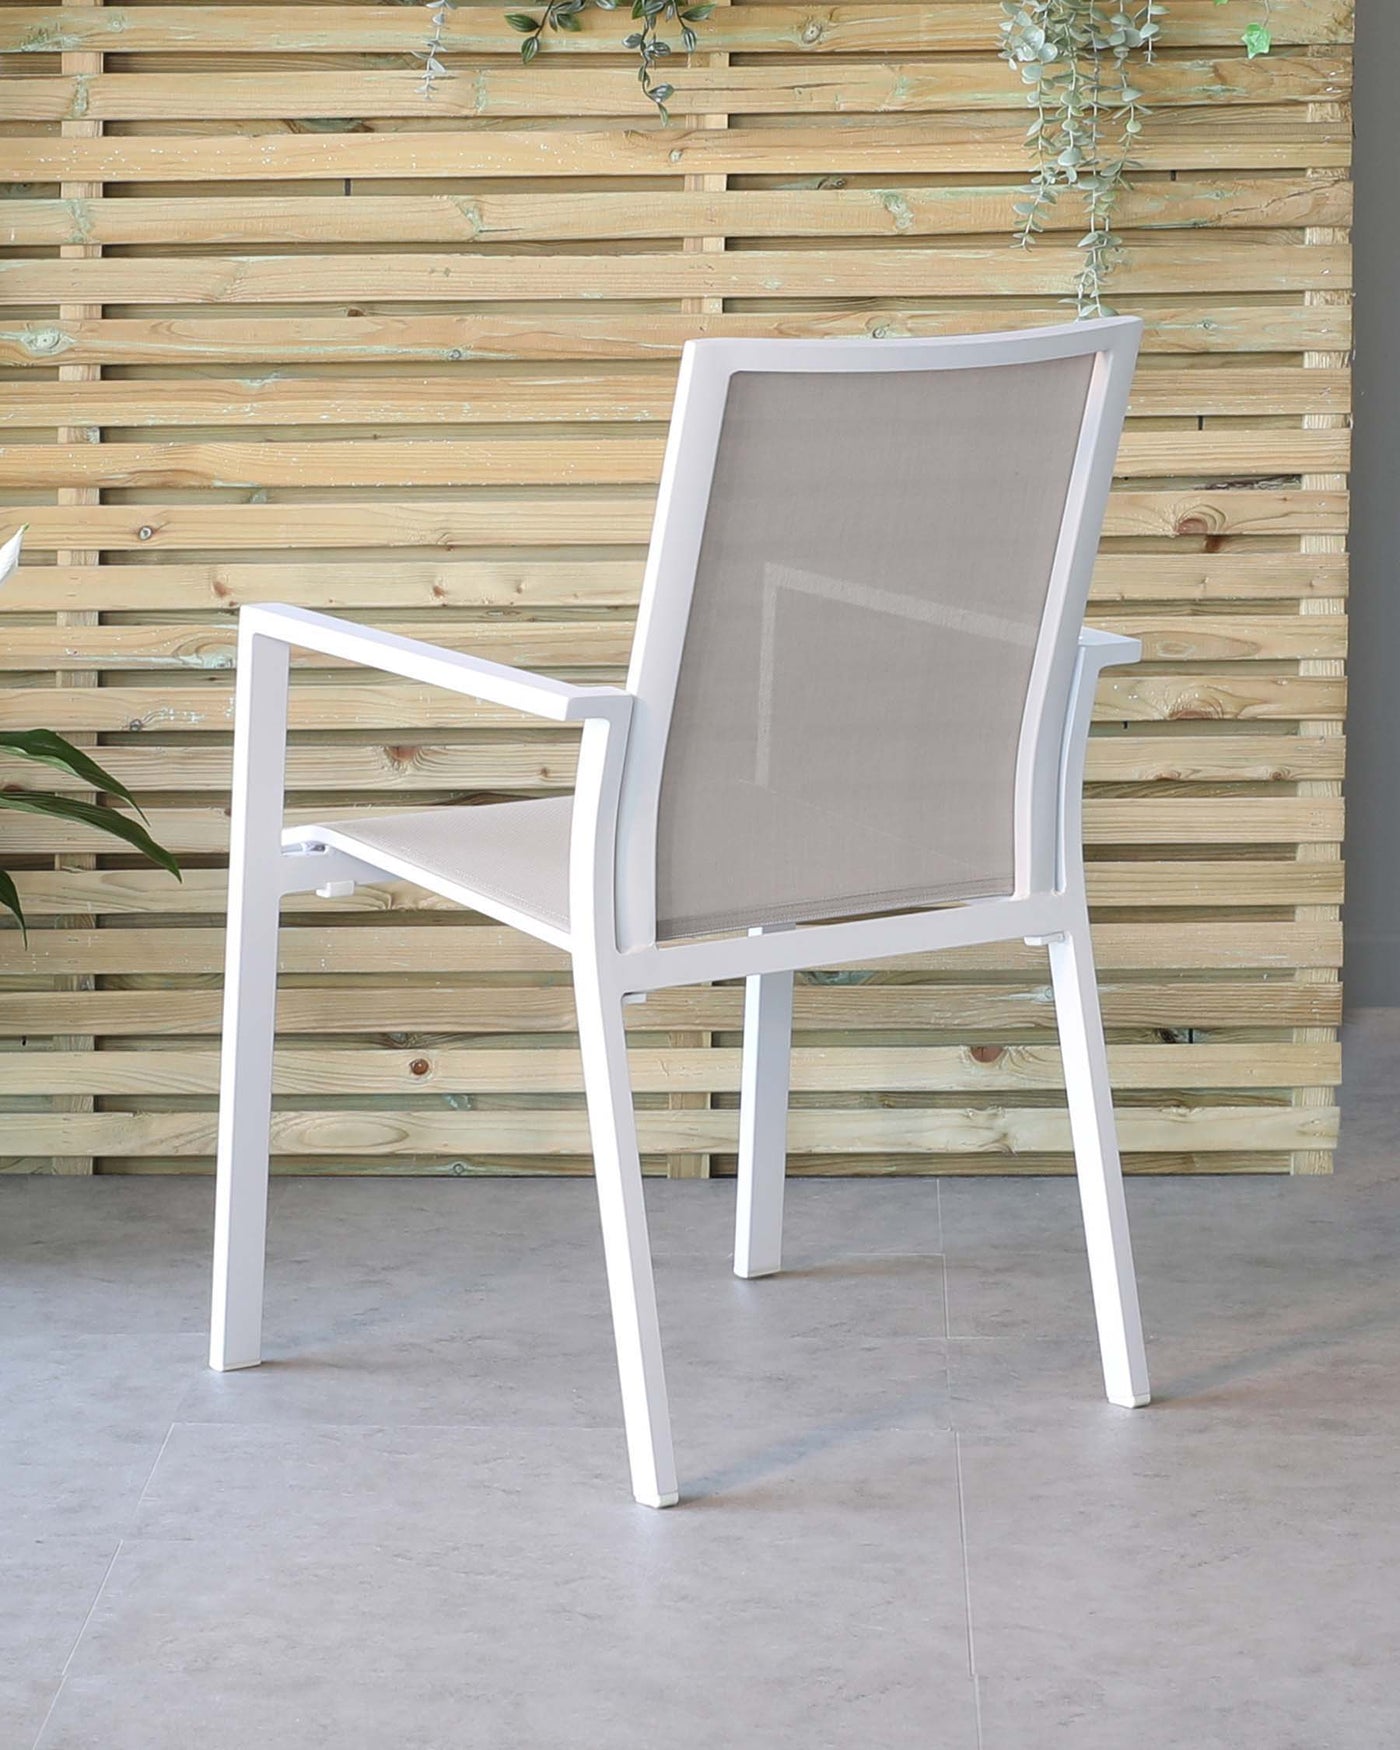 Modern outdoor chair featuring a white aluminium frame with sleek straight lines and a grey sling fabric for the seat and backrest, positioned against a wooden slat wall with greenery accents.